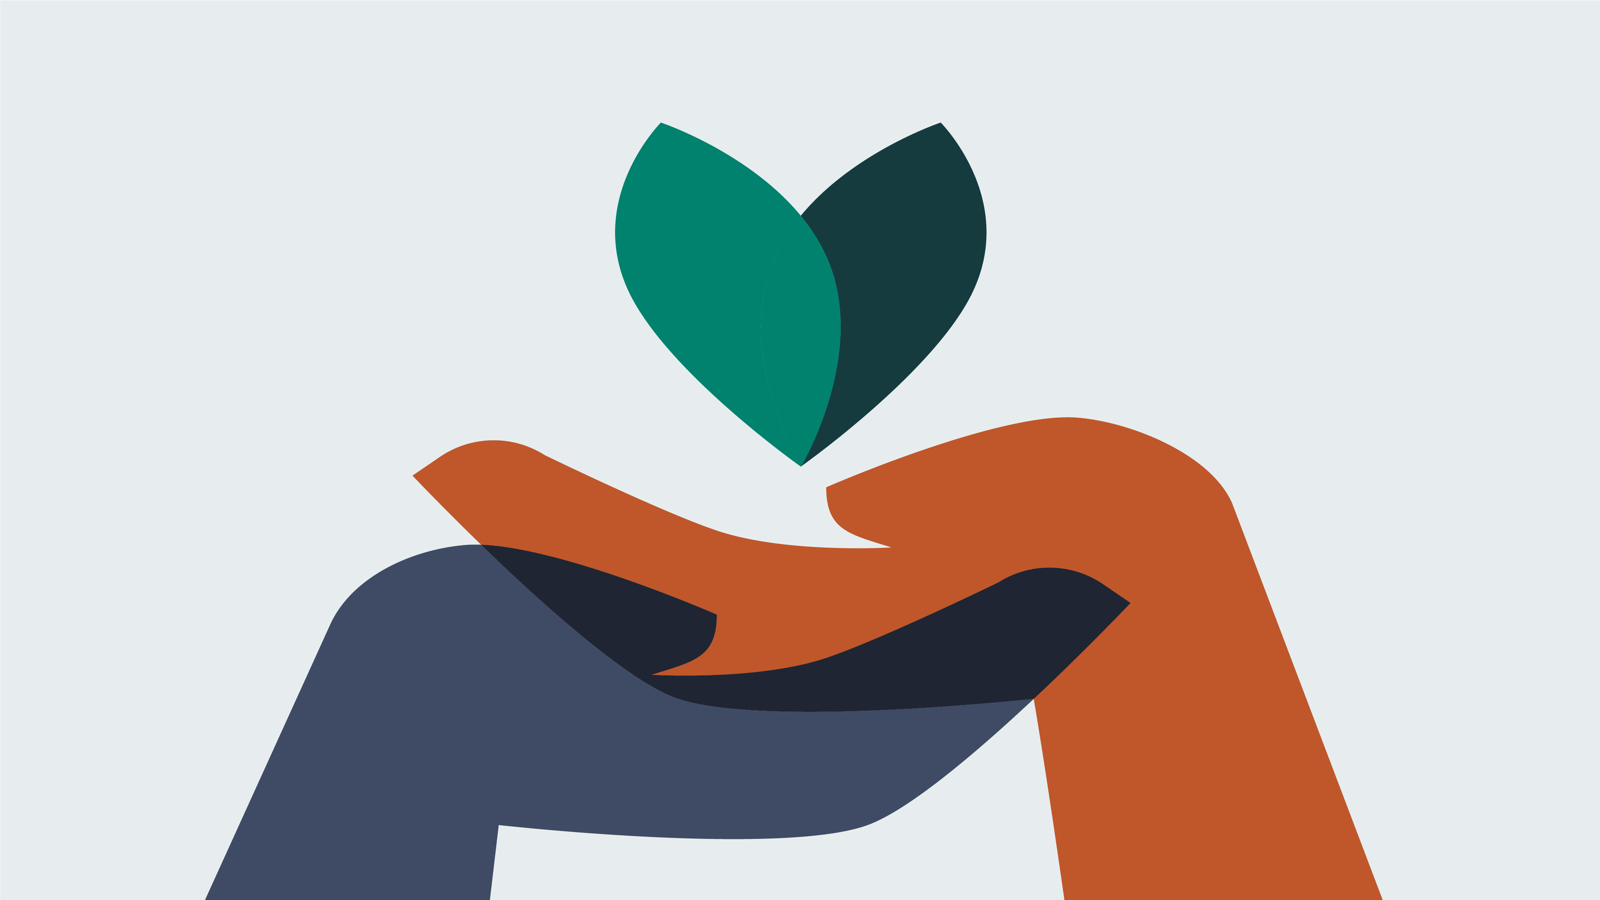 An illustration of two hands, one dark blue, the other burnt orange, lifting up a green leaf symbol.